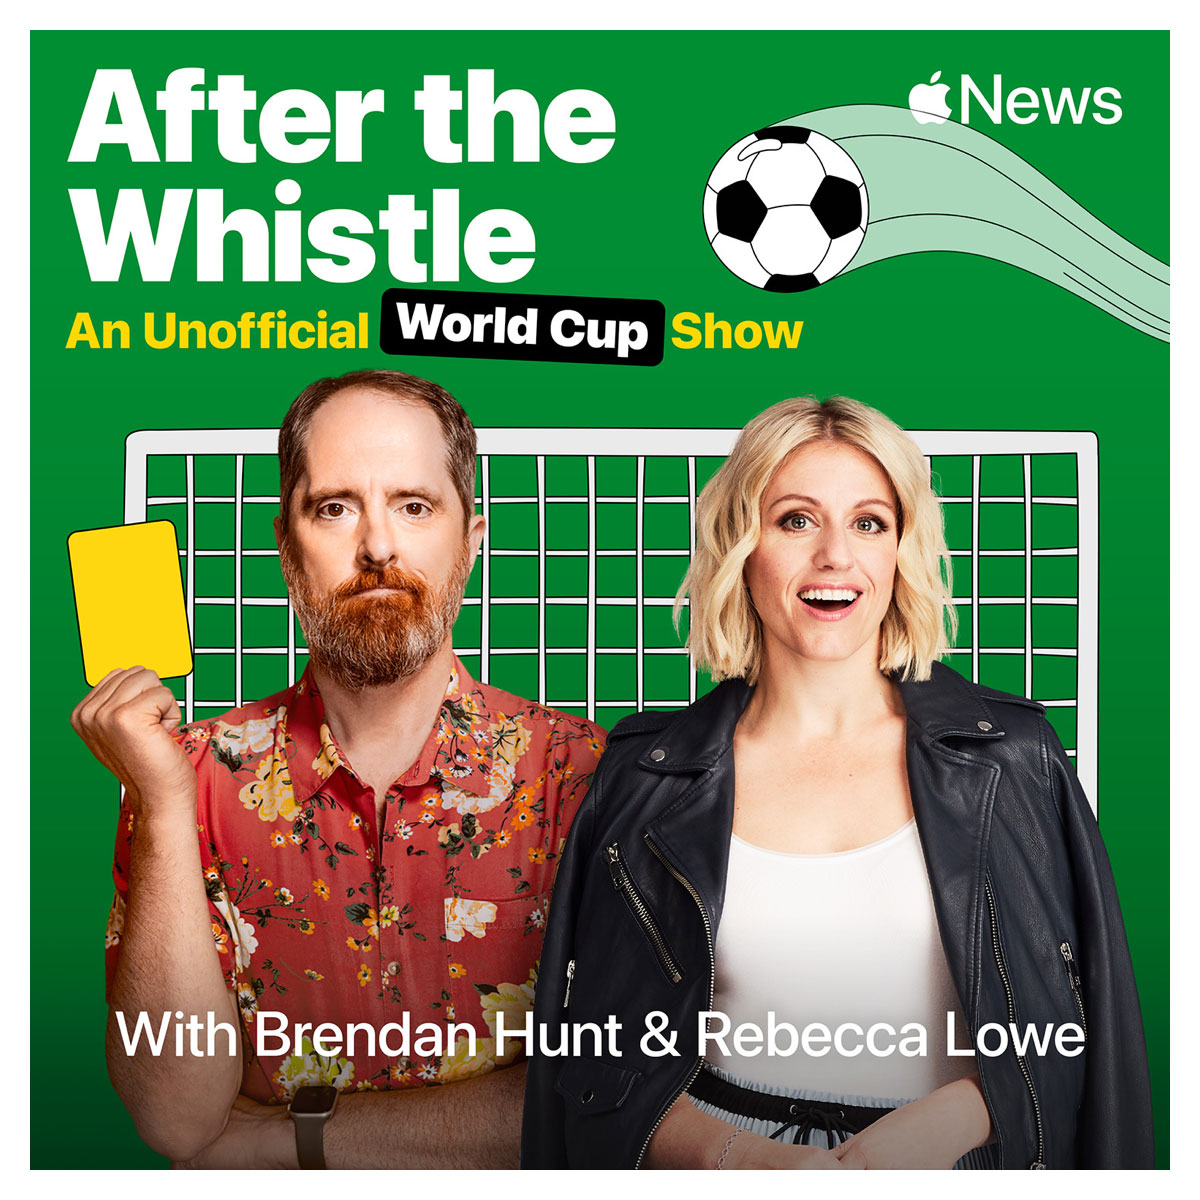 After the Whistle with Brendan Hunt and Rebecca Lowe